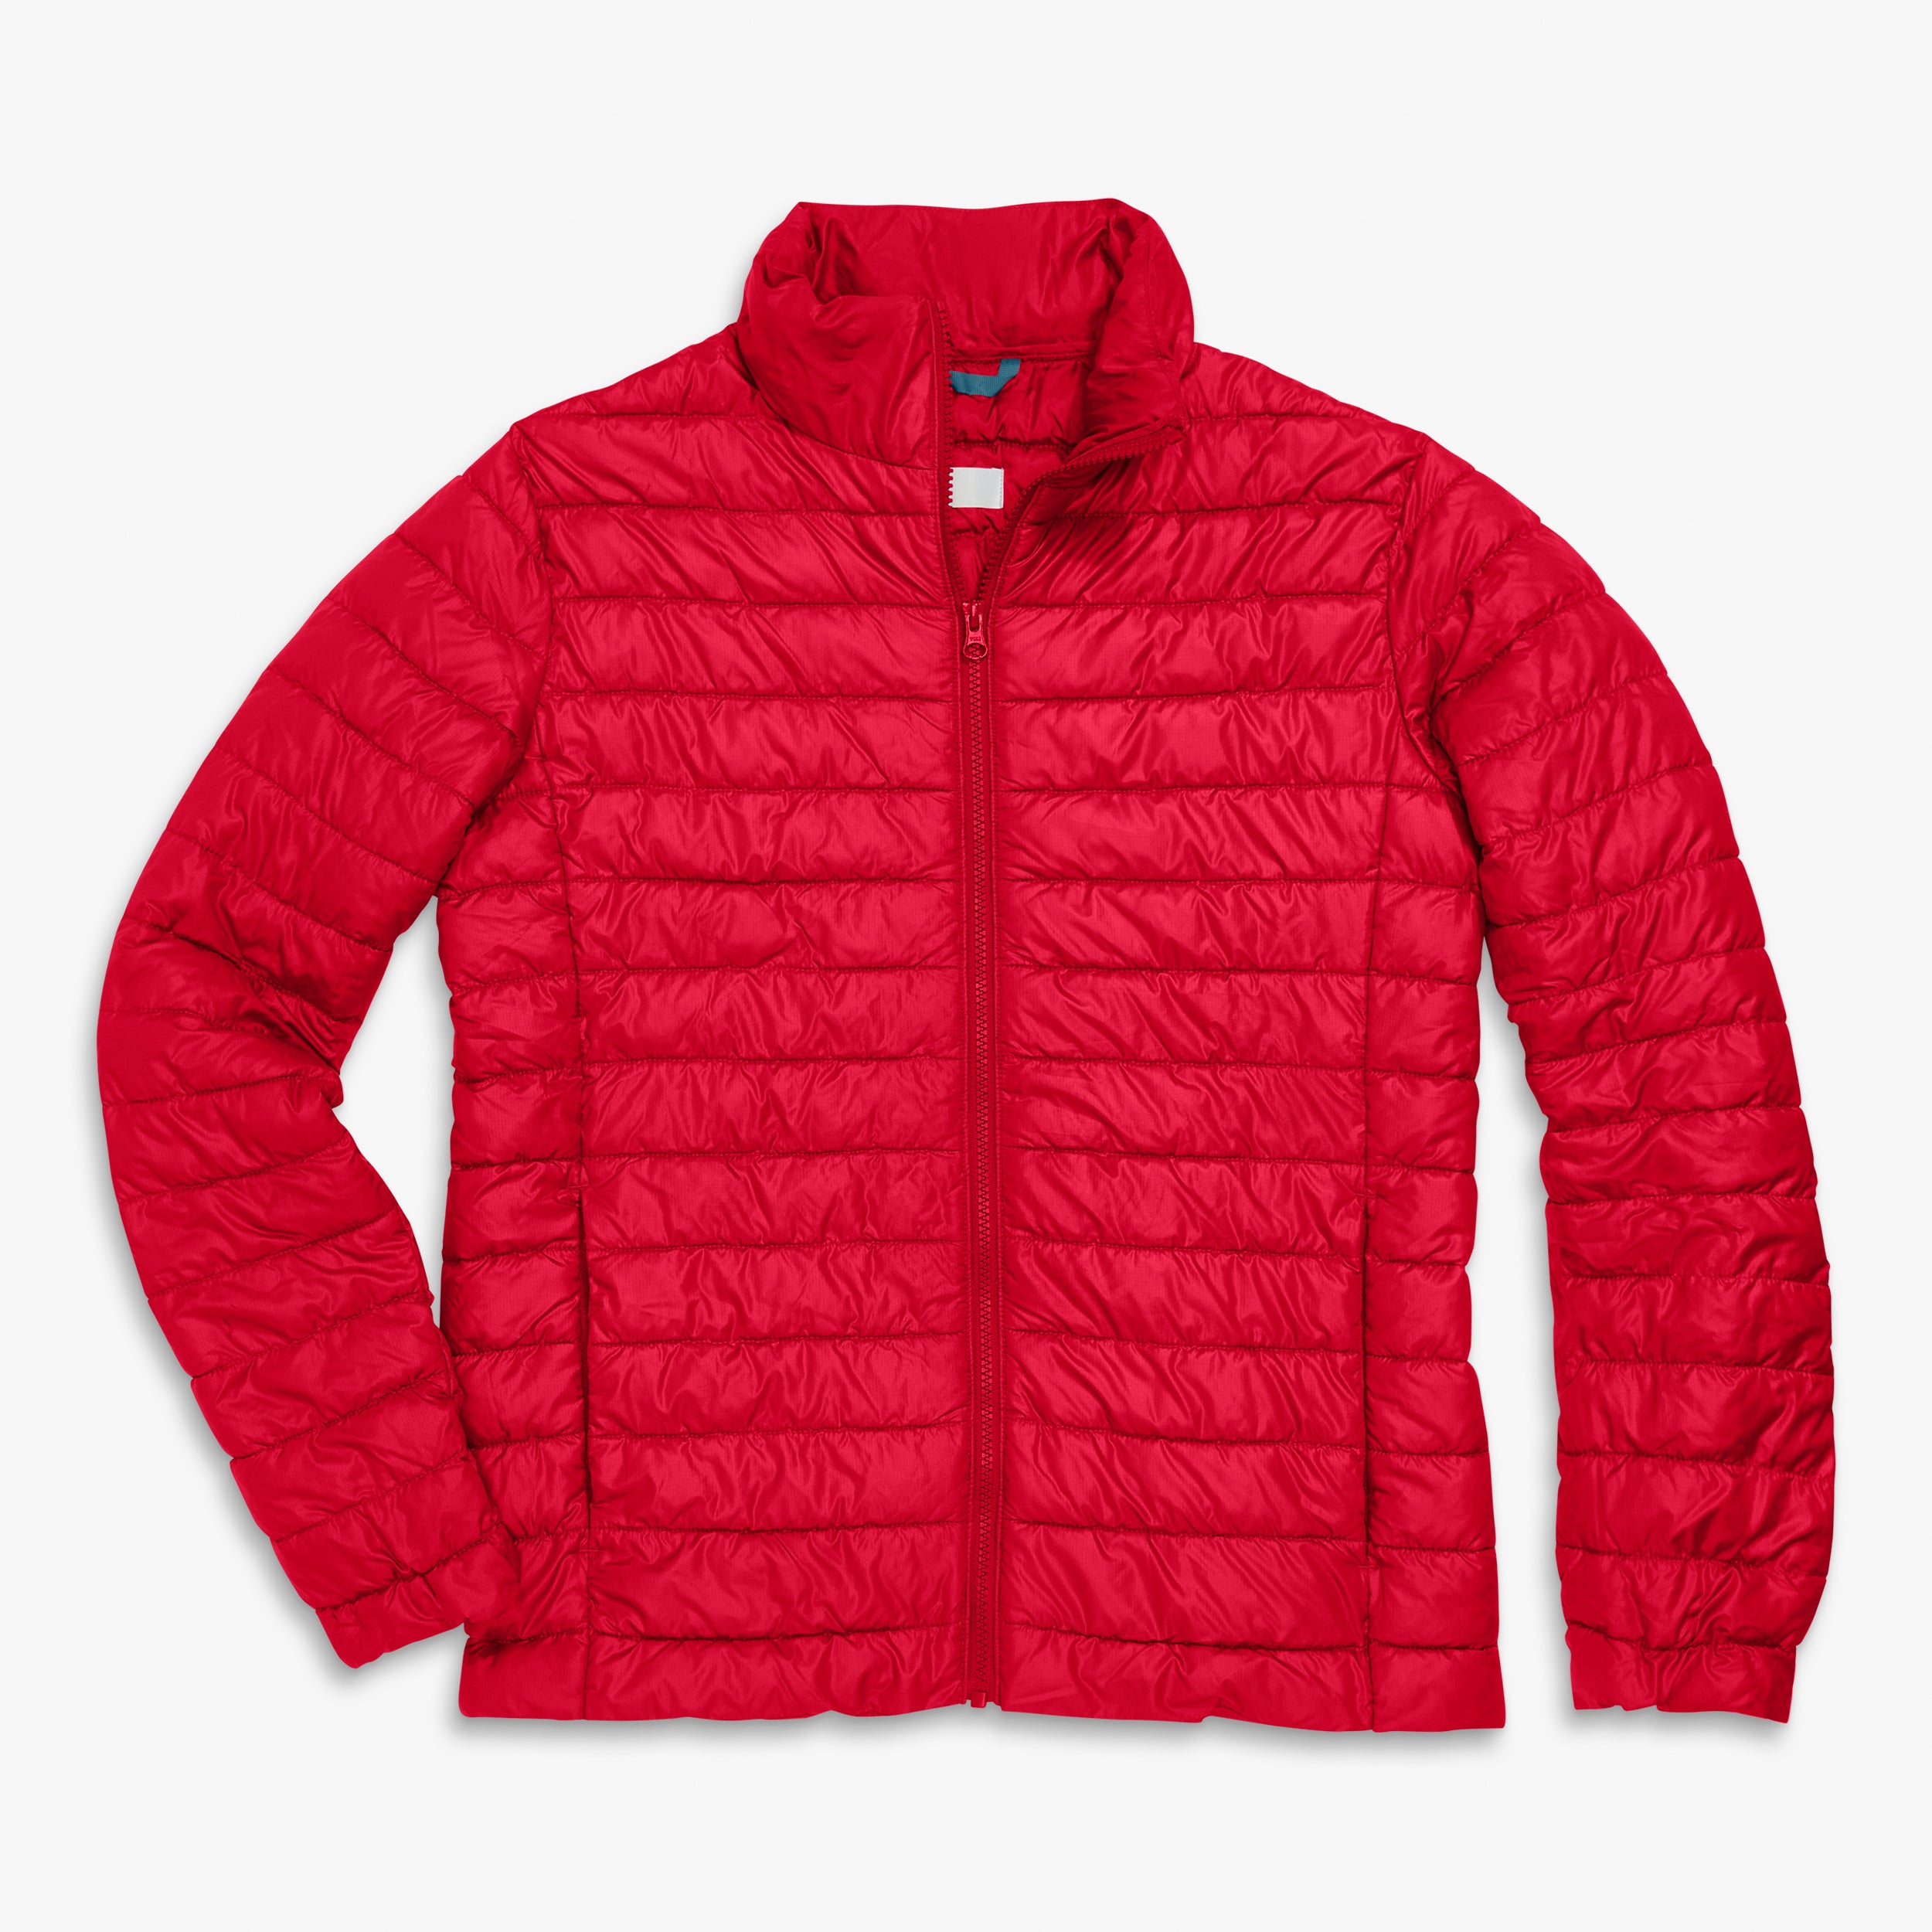 Grown-ups classic fit puffer jacket